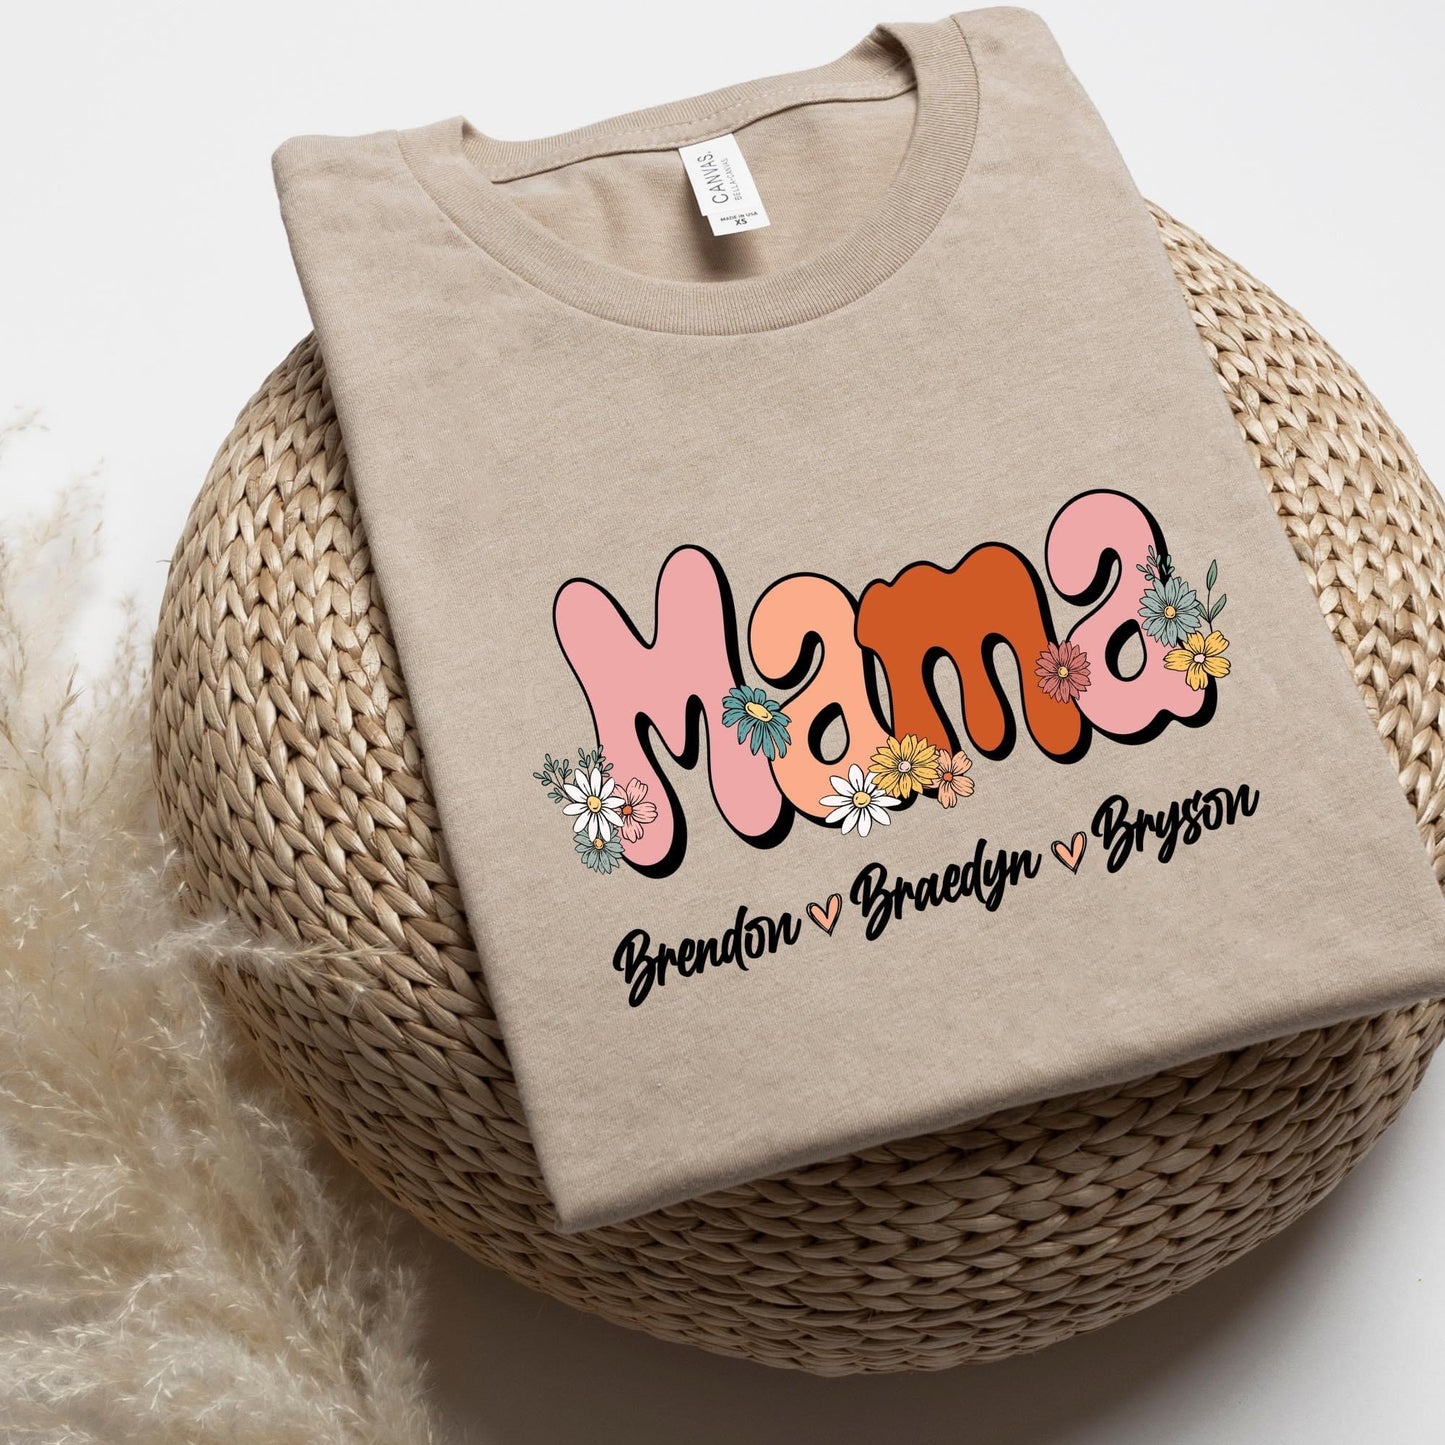 Groovy Floral Mama, Aunt, Grandma, Etc. with Kids names